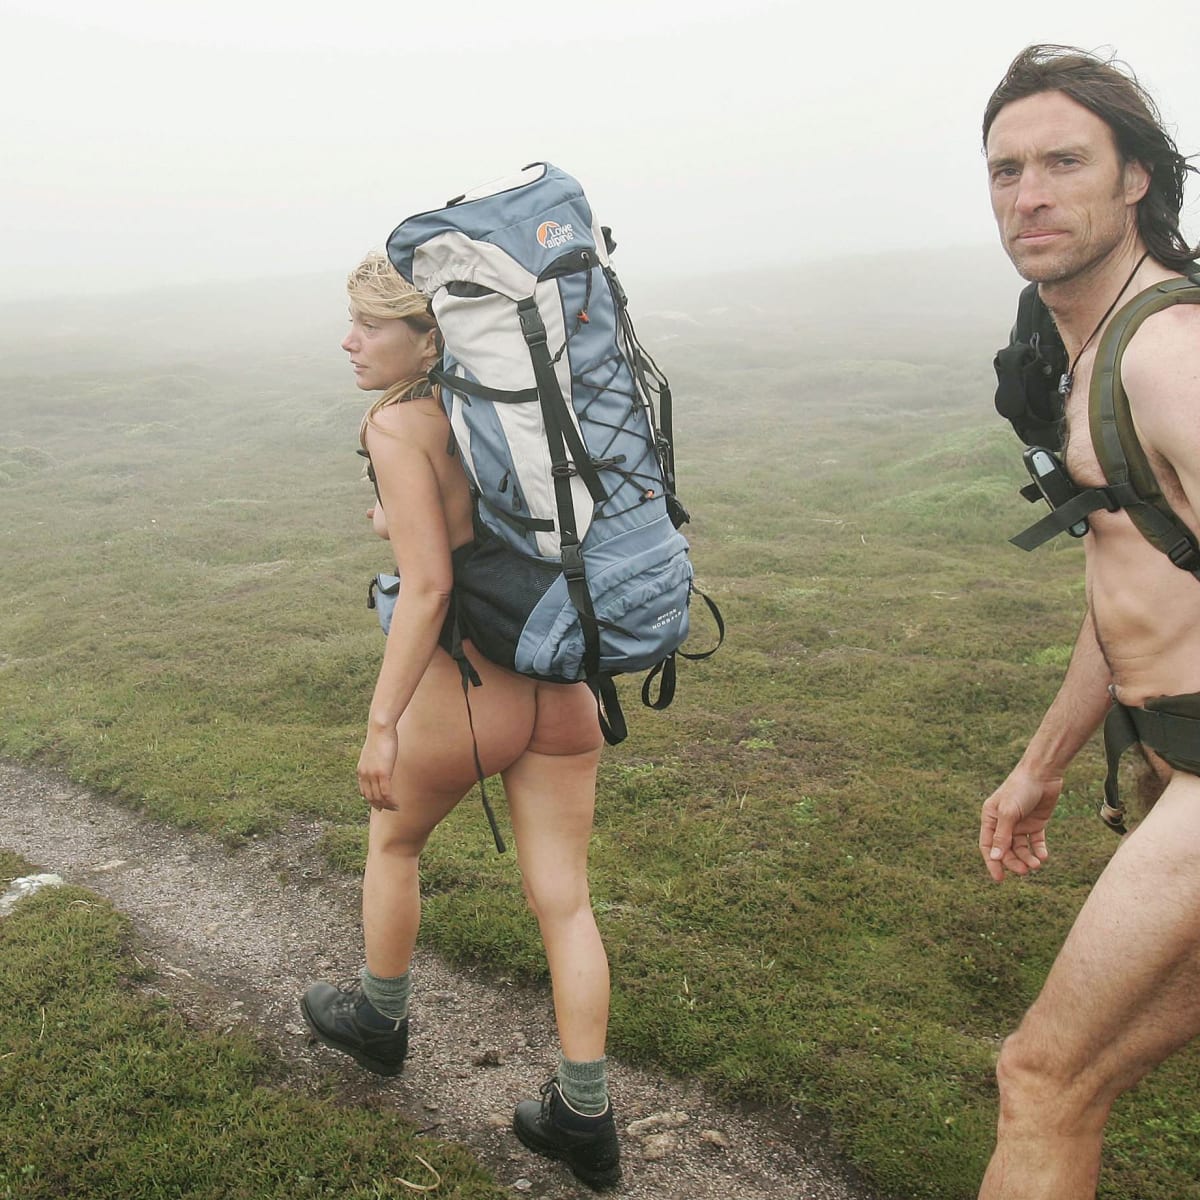 Happy Nude Hiking Day! Heres How to (Legally) Make the Most of It image